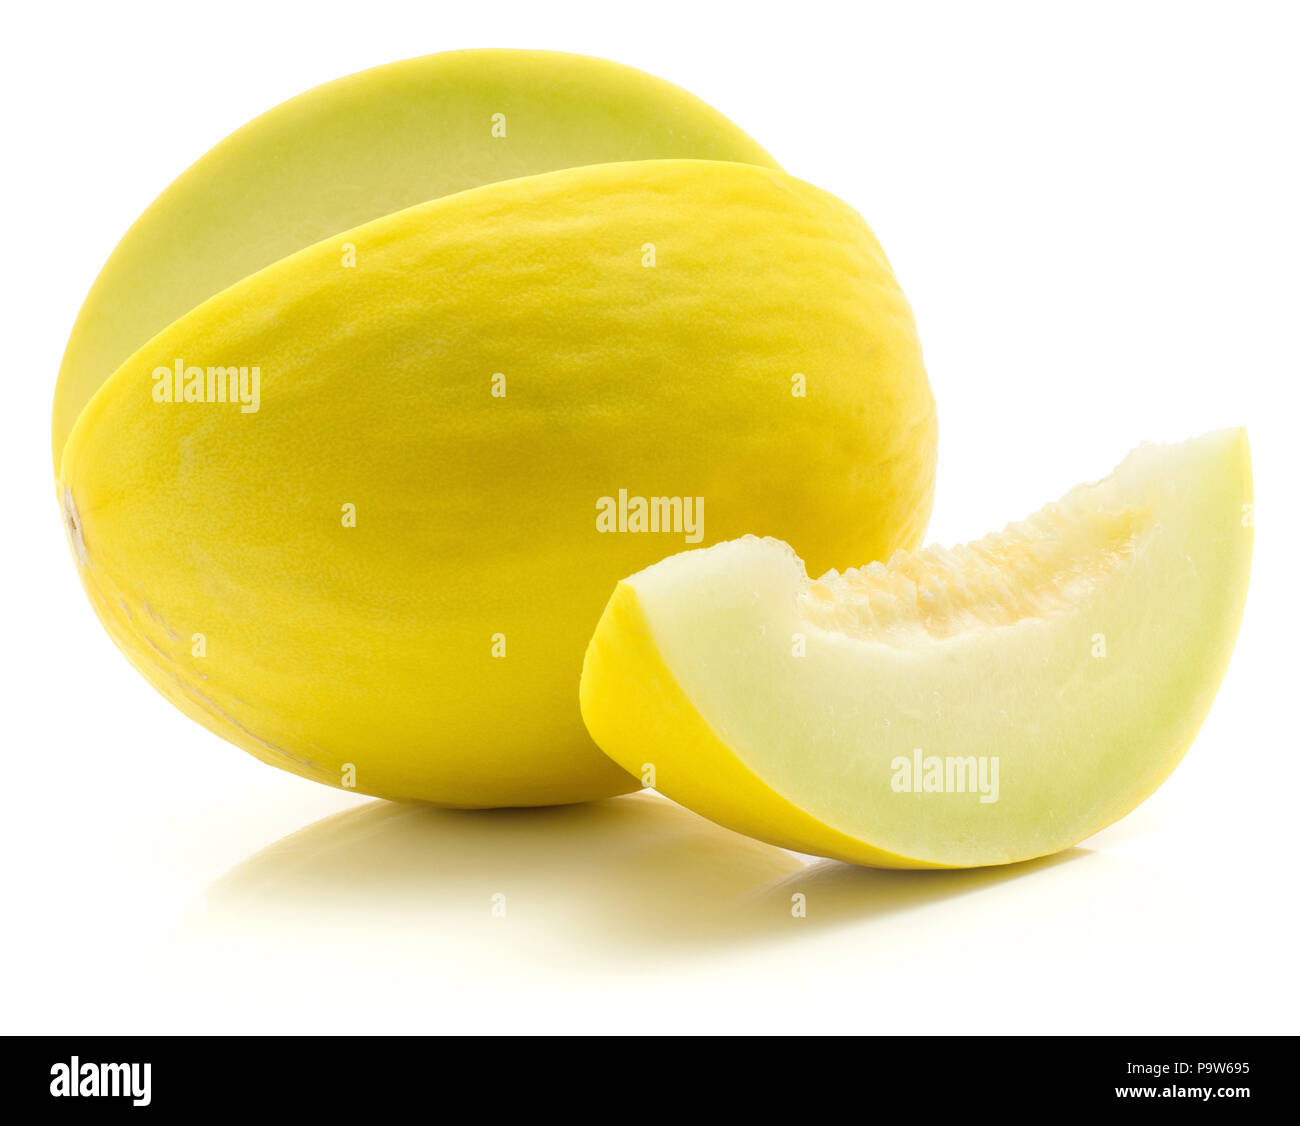 Yellow honeydew melon cut open with separated slice isolated on white background without seeds Stock Photo